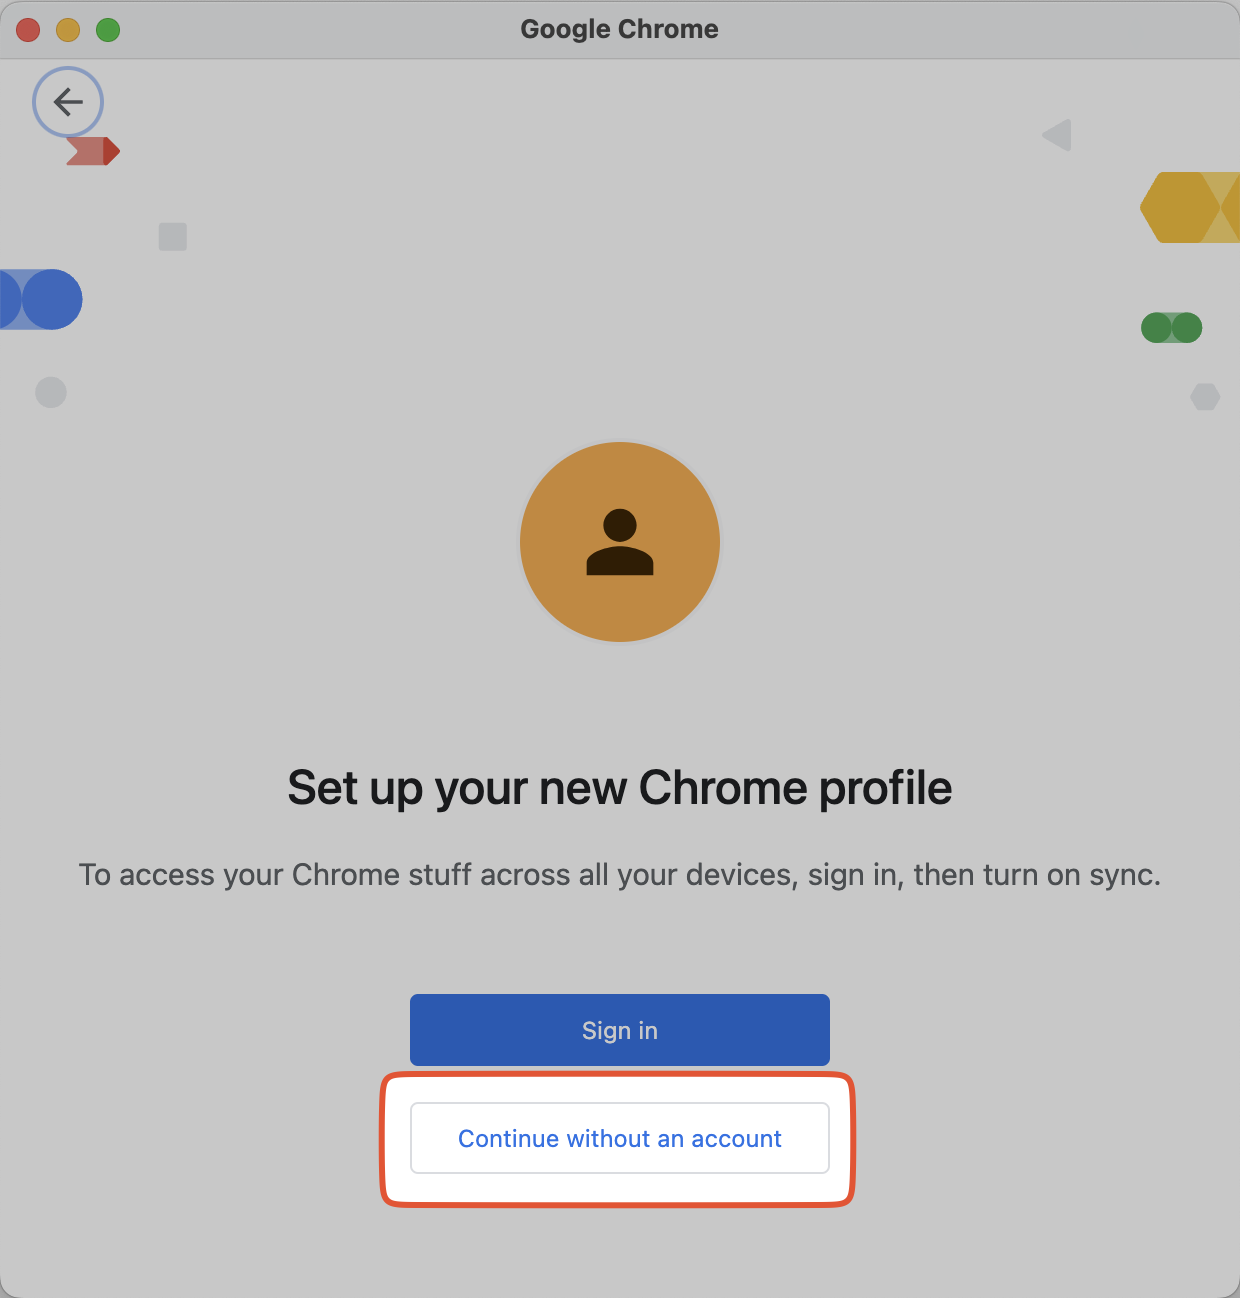 Set up your new Chrome profile